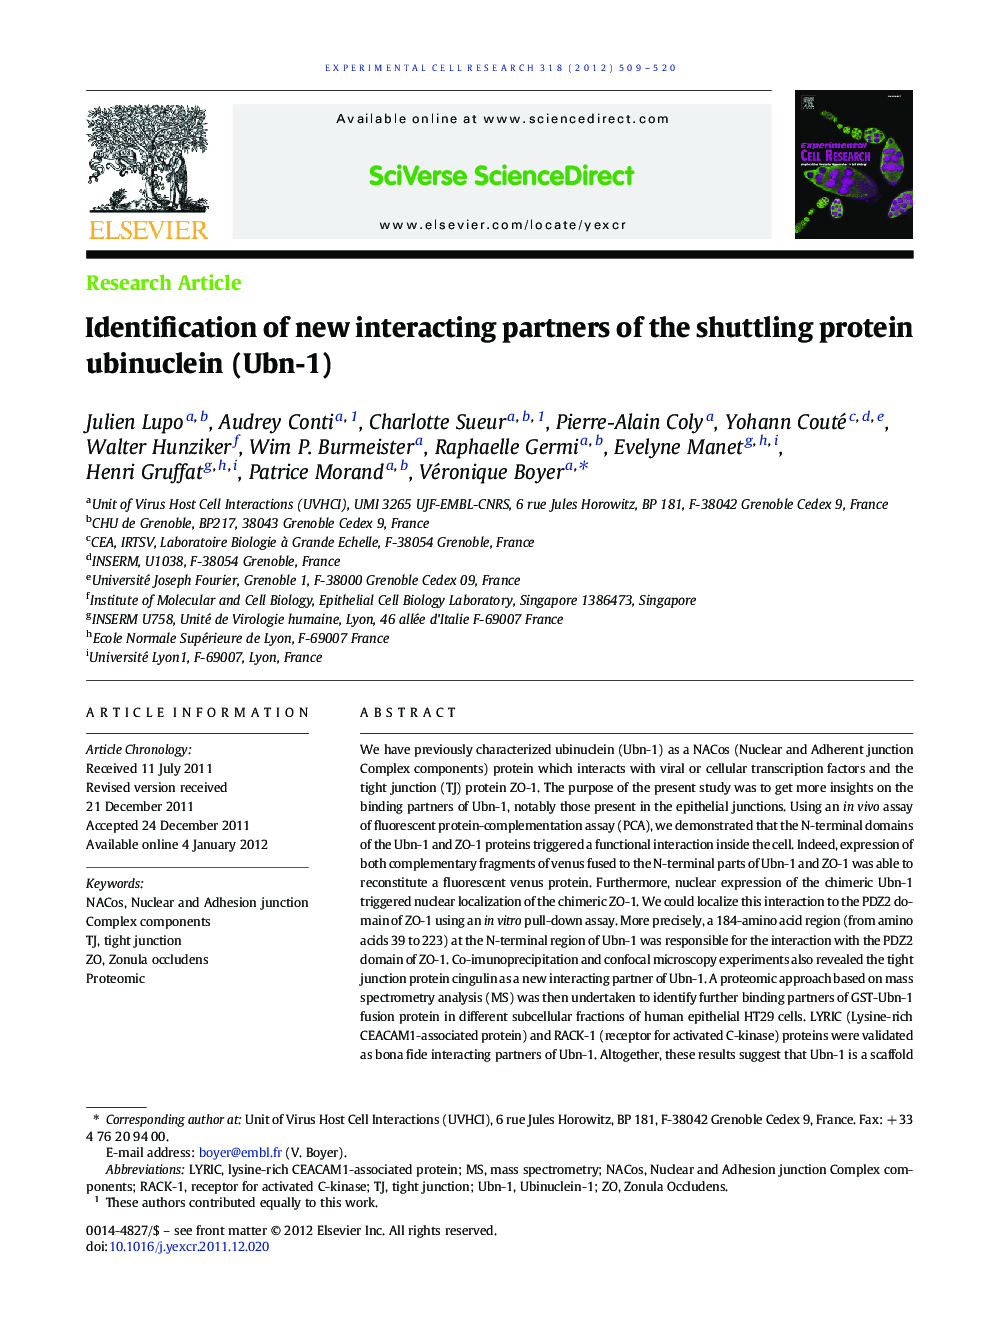 Identification of new interacting partners of the shuttling protein ubinuclein (Ubn-1)